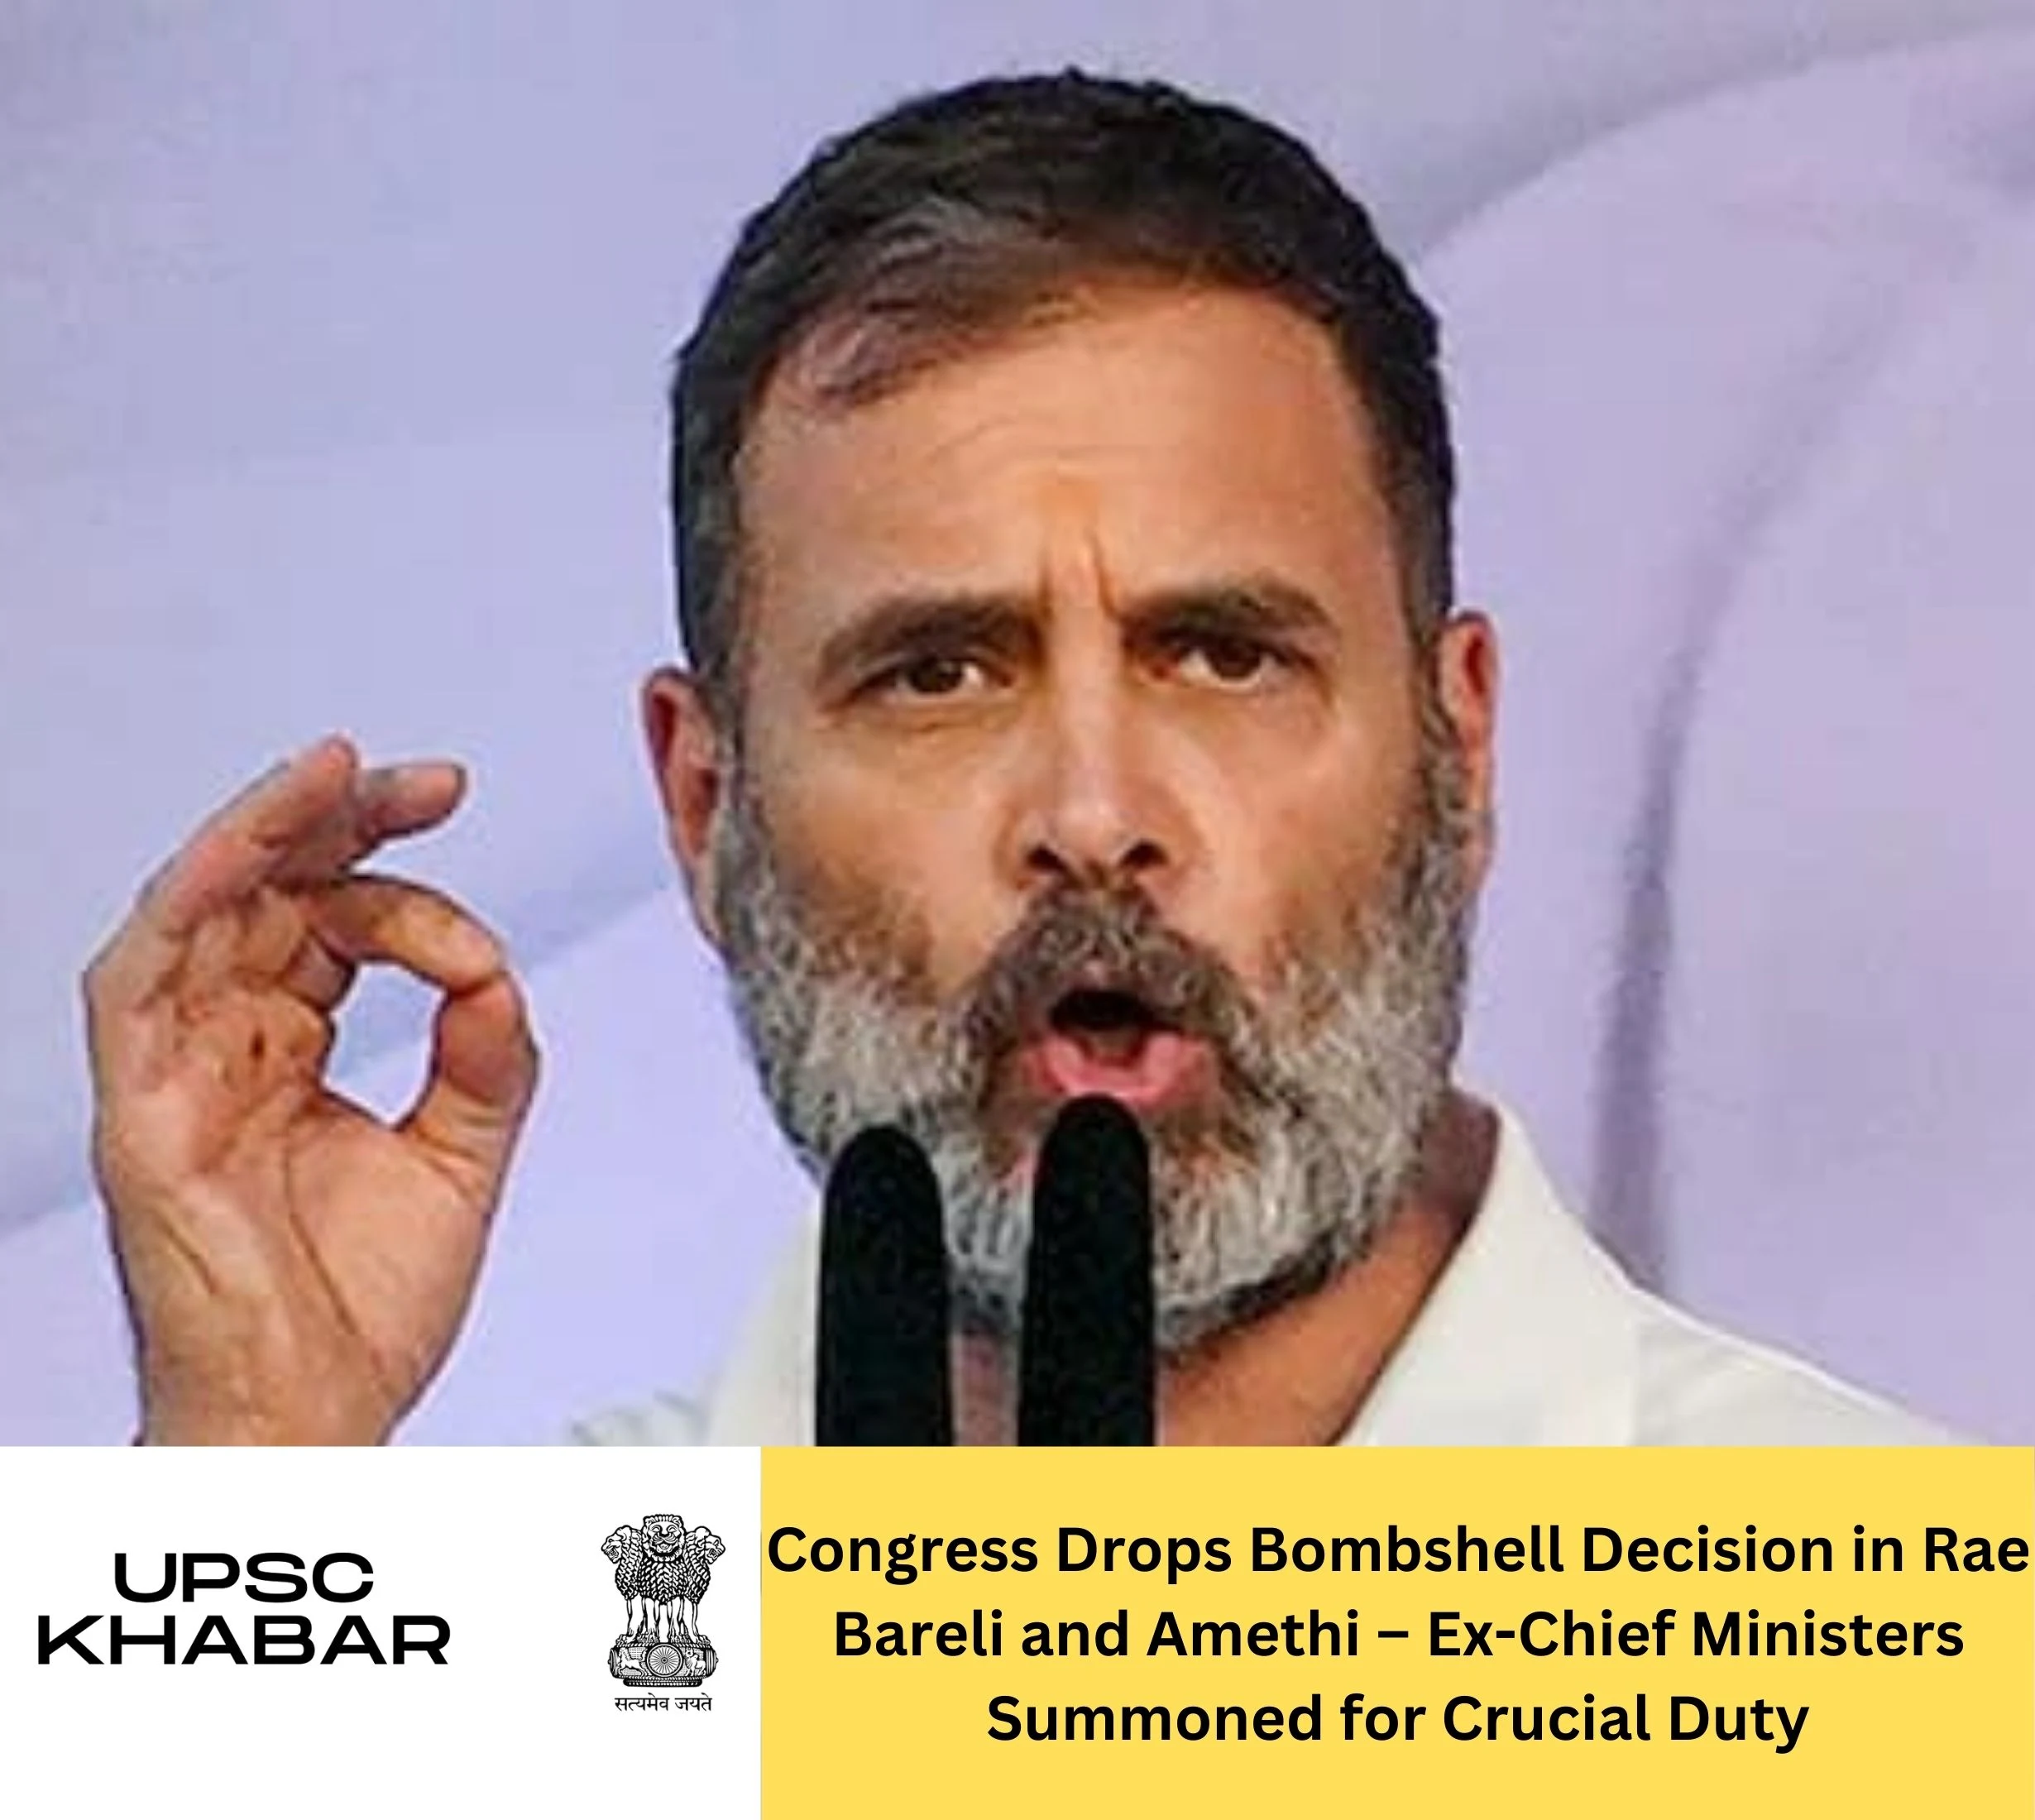 Congress Drops Bombshell Decision in Rae Bareli and Amethi – Ex-Chief Ministers Summoned for Crucial Duty